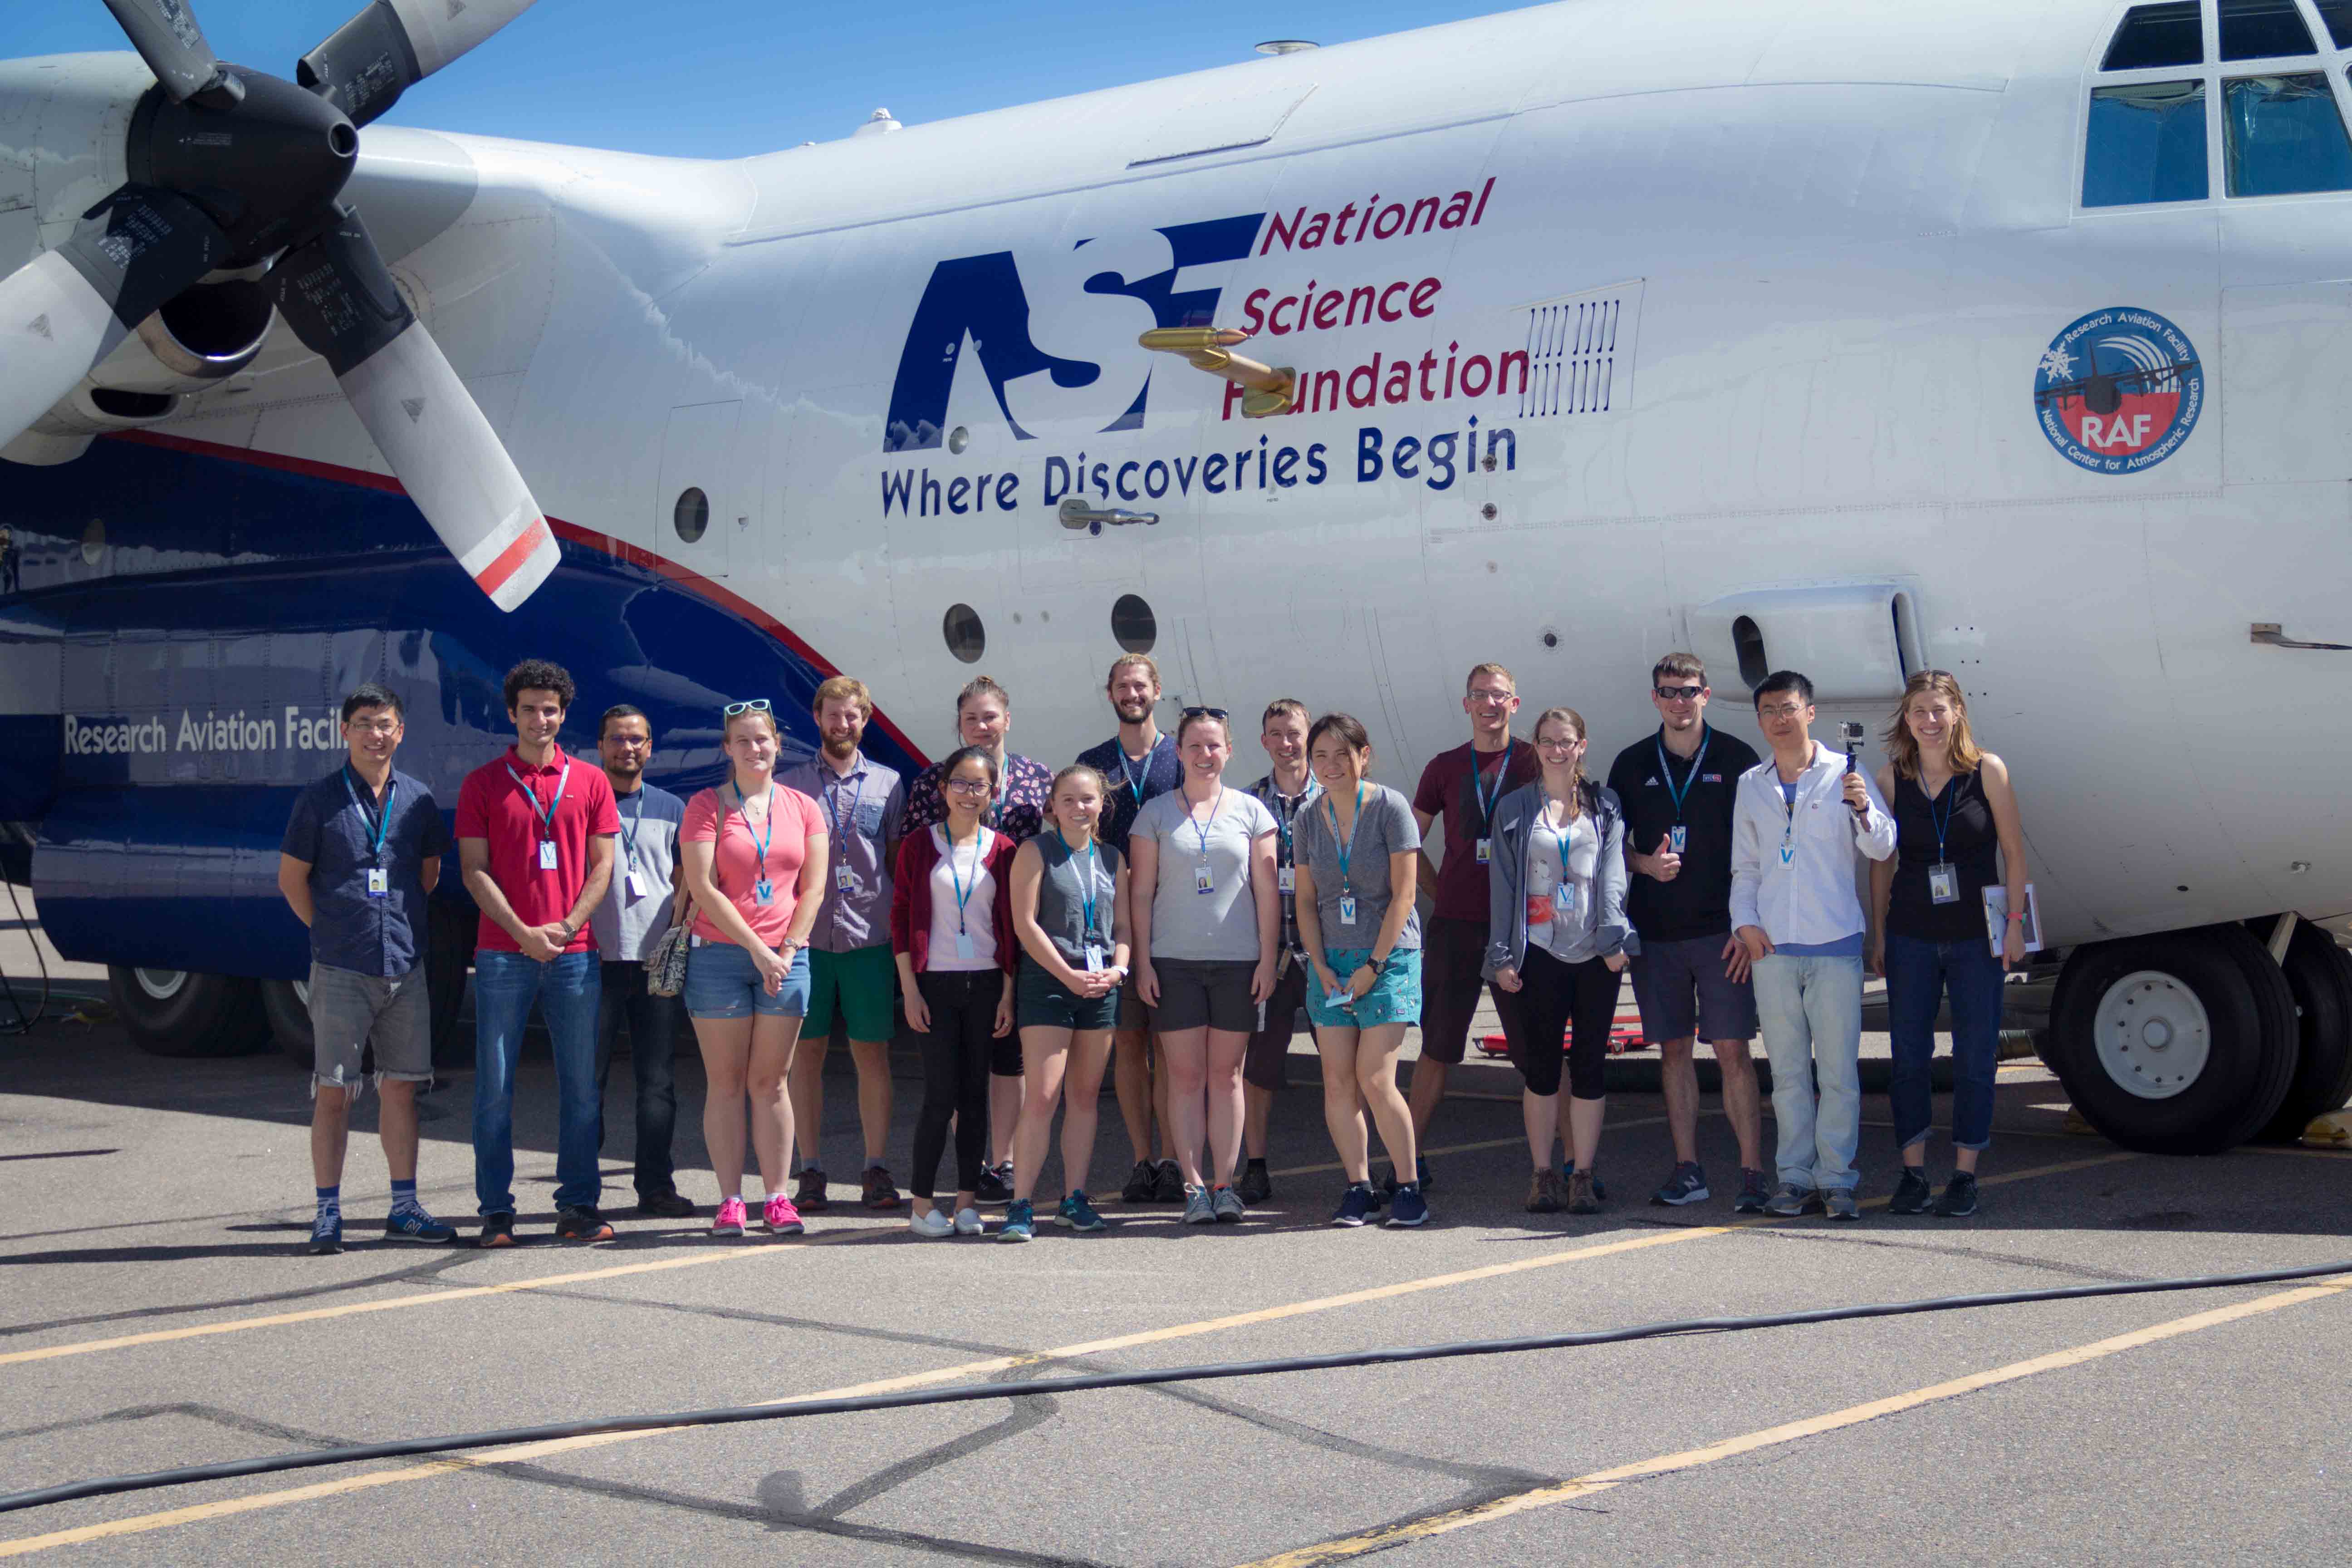 UM and Colorado State University students in the Aircraft Observations and Atmospheric Chemistry course pose in front of their flying laboratory equipped with state-of-the-art instruments to map the smoke over the western U.S. this past summer. (Photo courtesy of Ali Akherati)